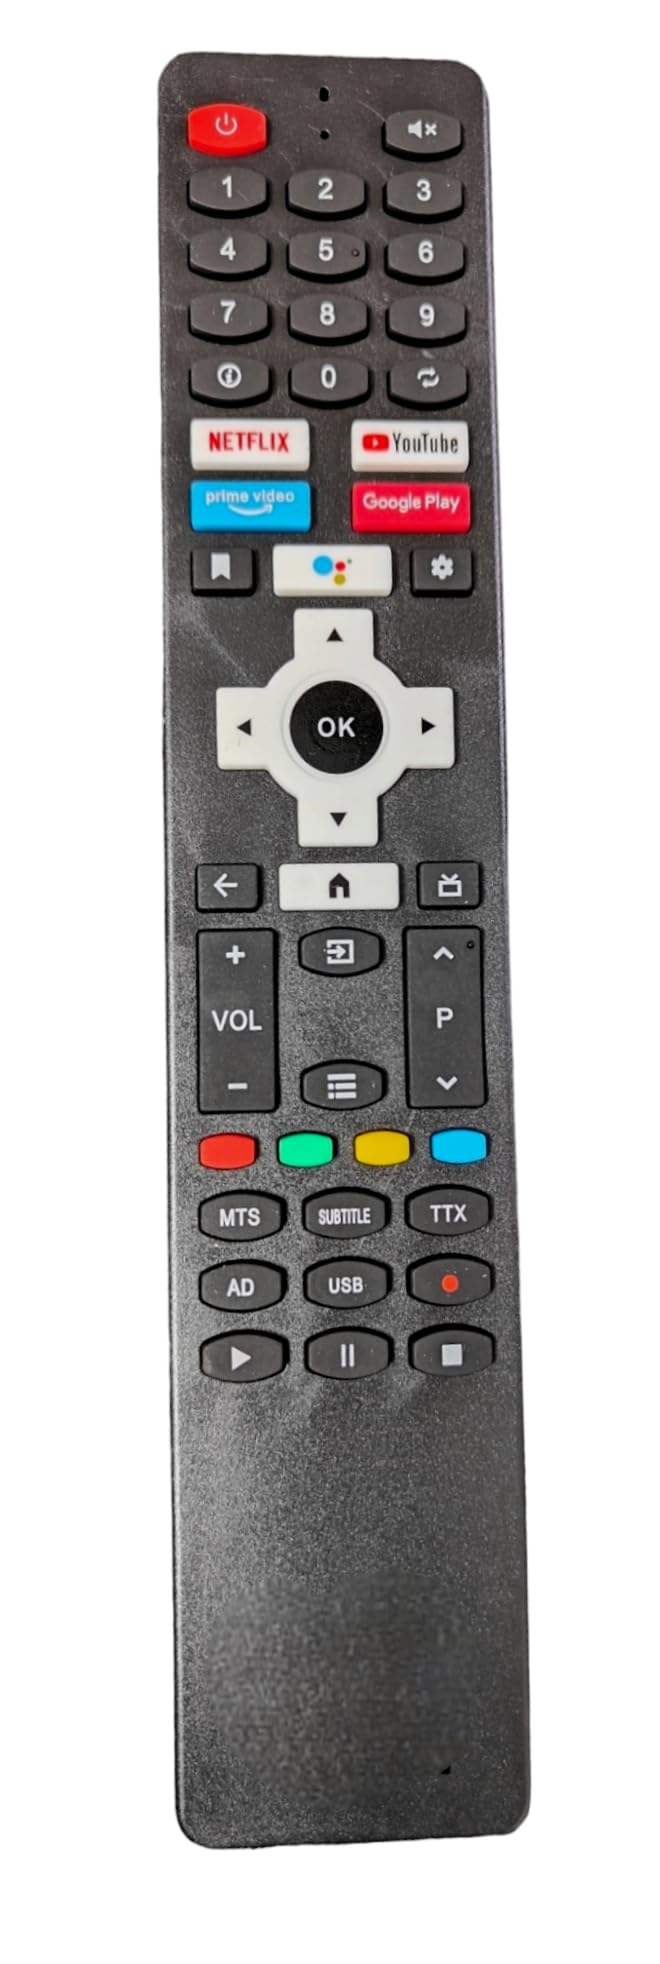 Ehop Compatible Remote Control for Blaupunkt Smart LCD LED TV Remote (Without Voice Command Function) (Old Remote Must be Exactly Same for it to Work)